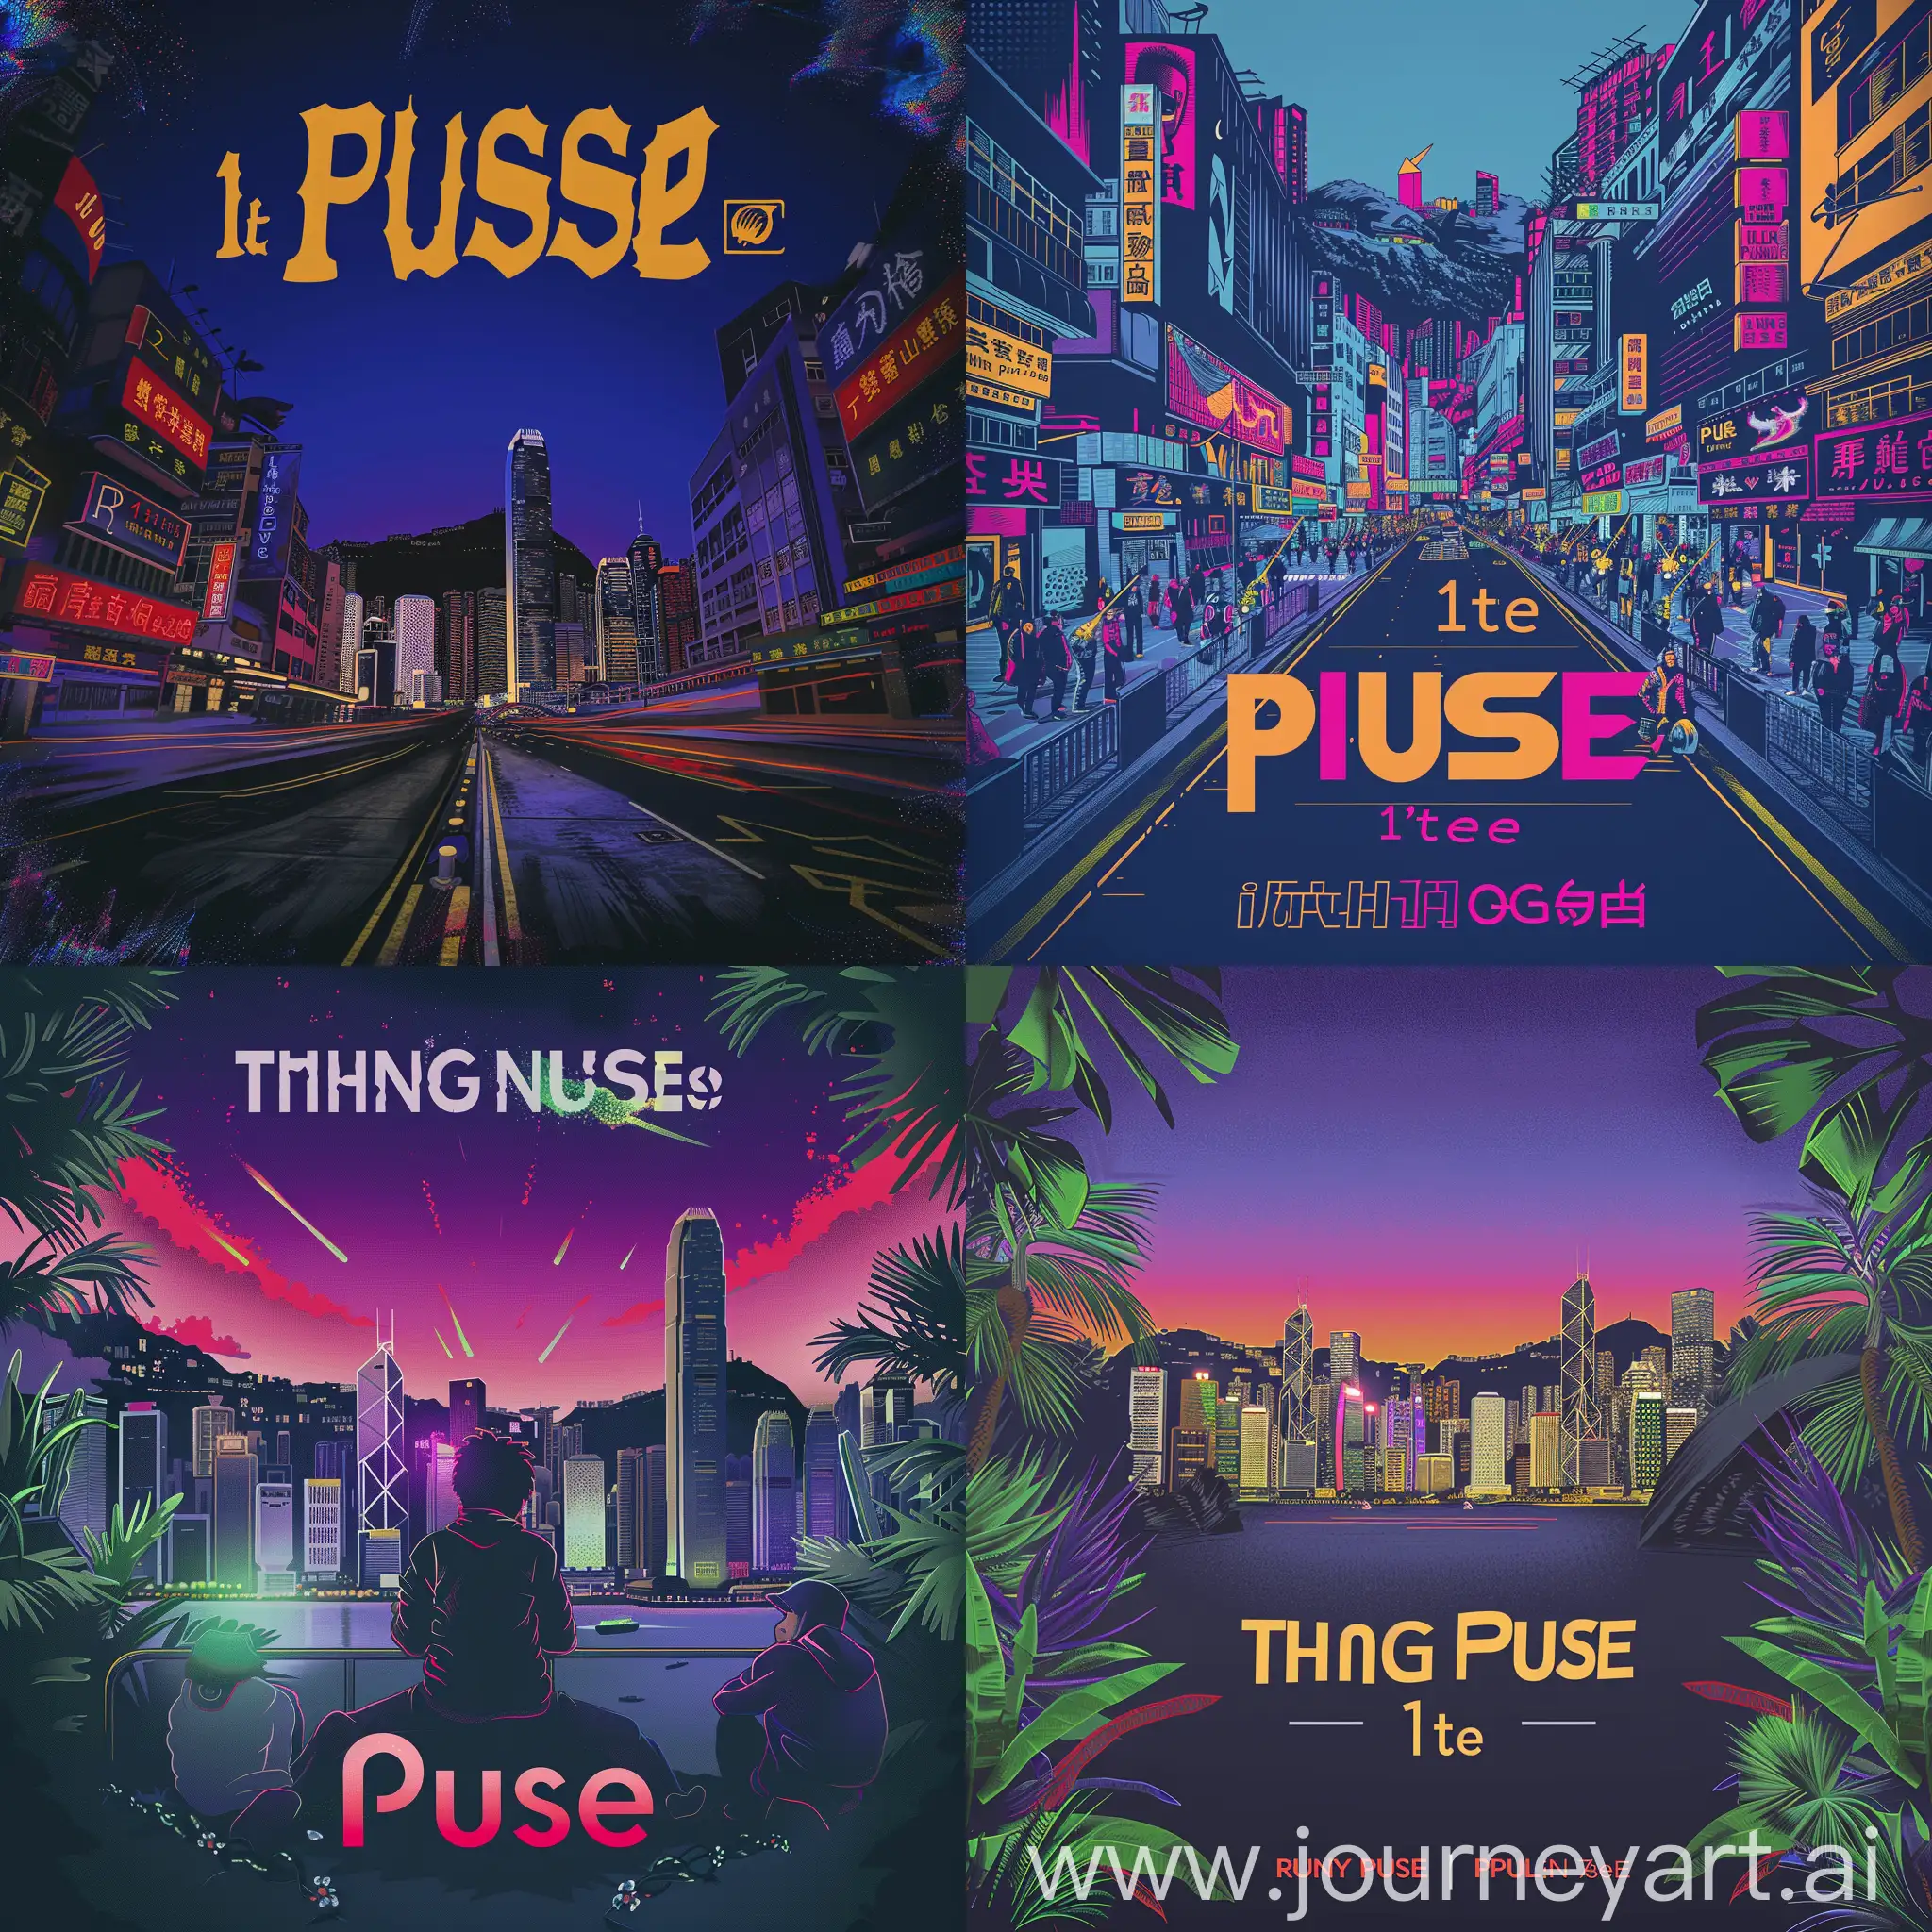 Please generate a poster to celebrate the 1st anniversary of Hong Kong Pulse